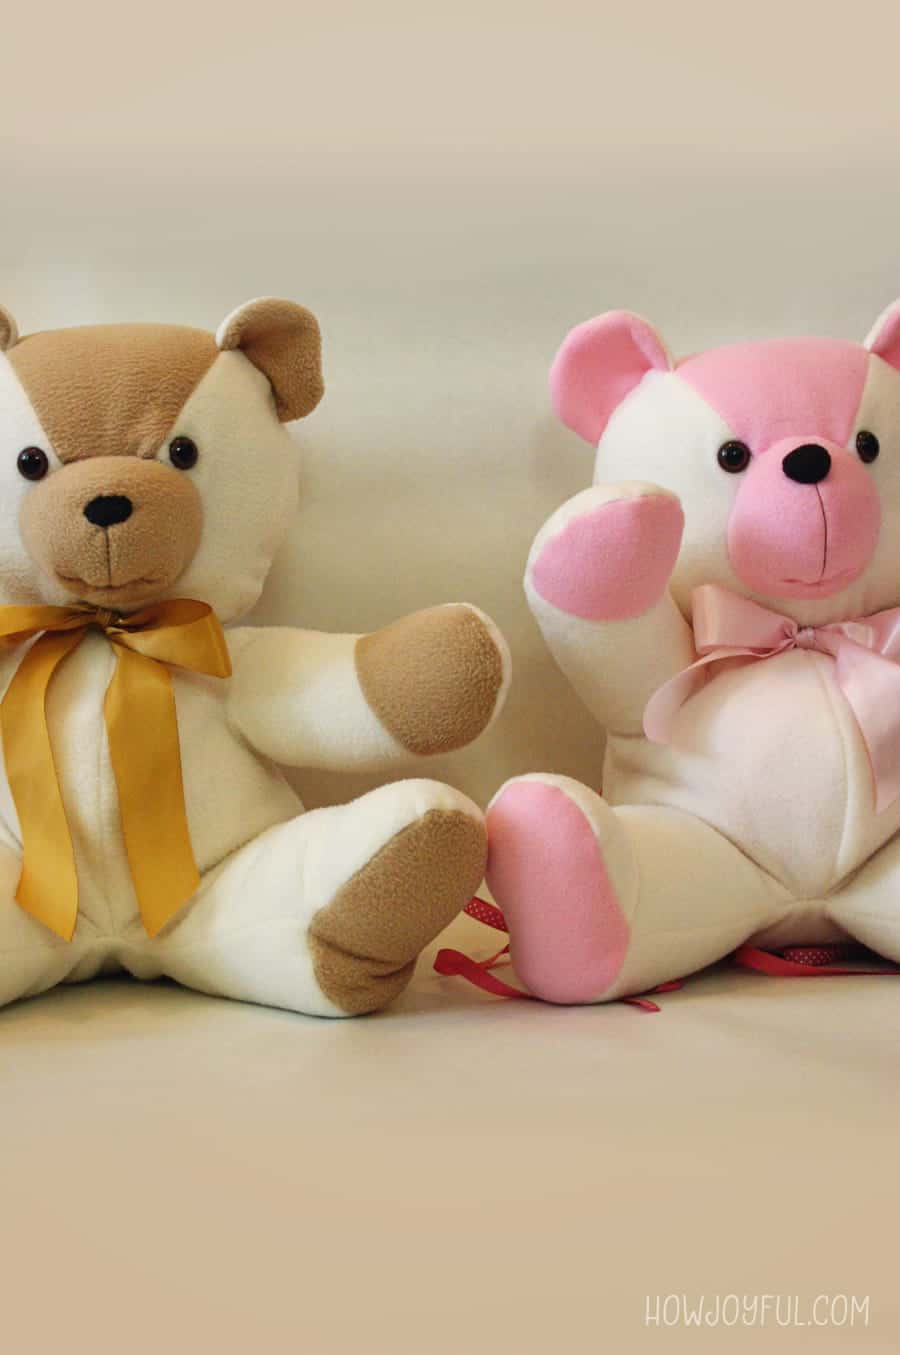 PDF sewing pattern for a miniature bear. Easy teddy bear pattern and a list of materials